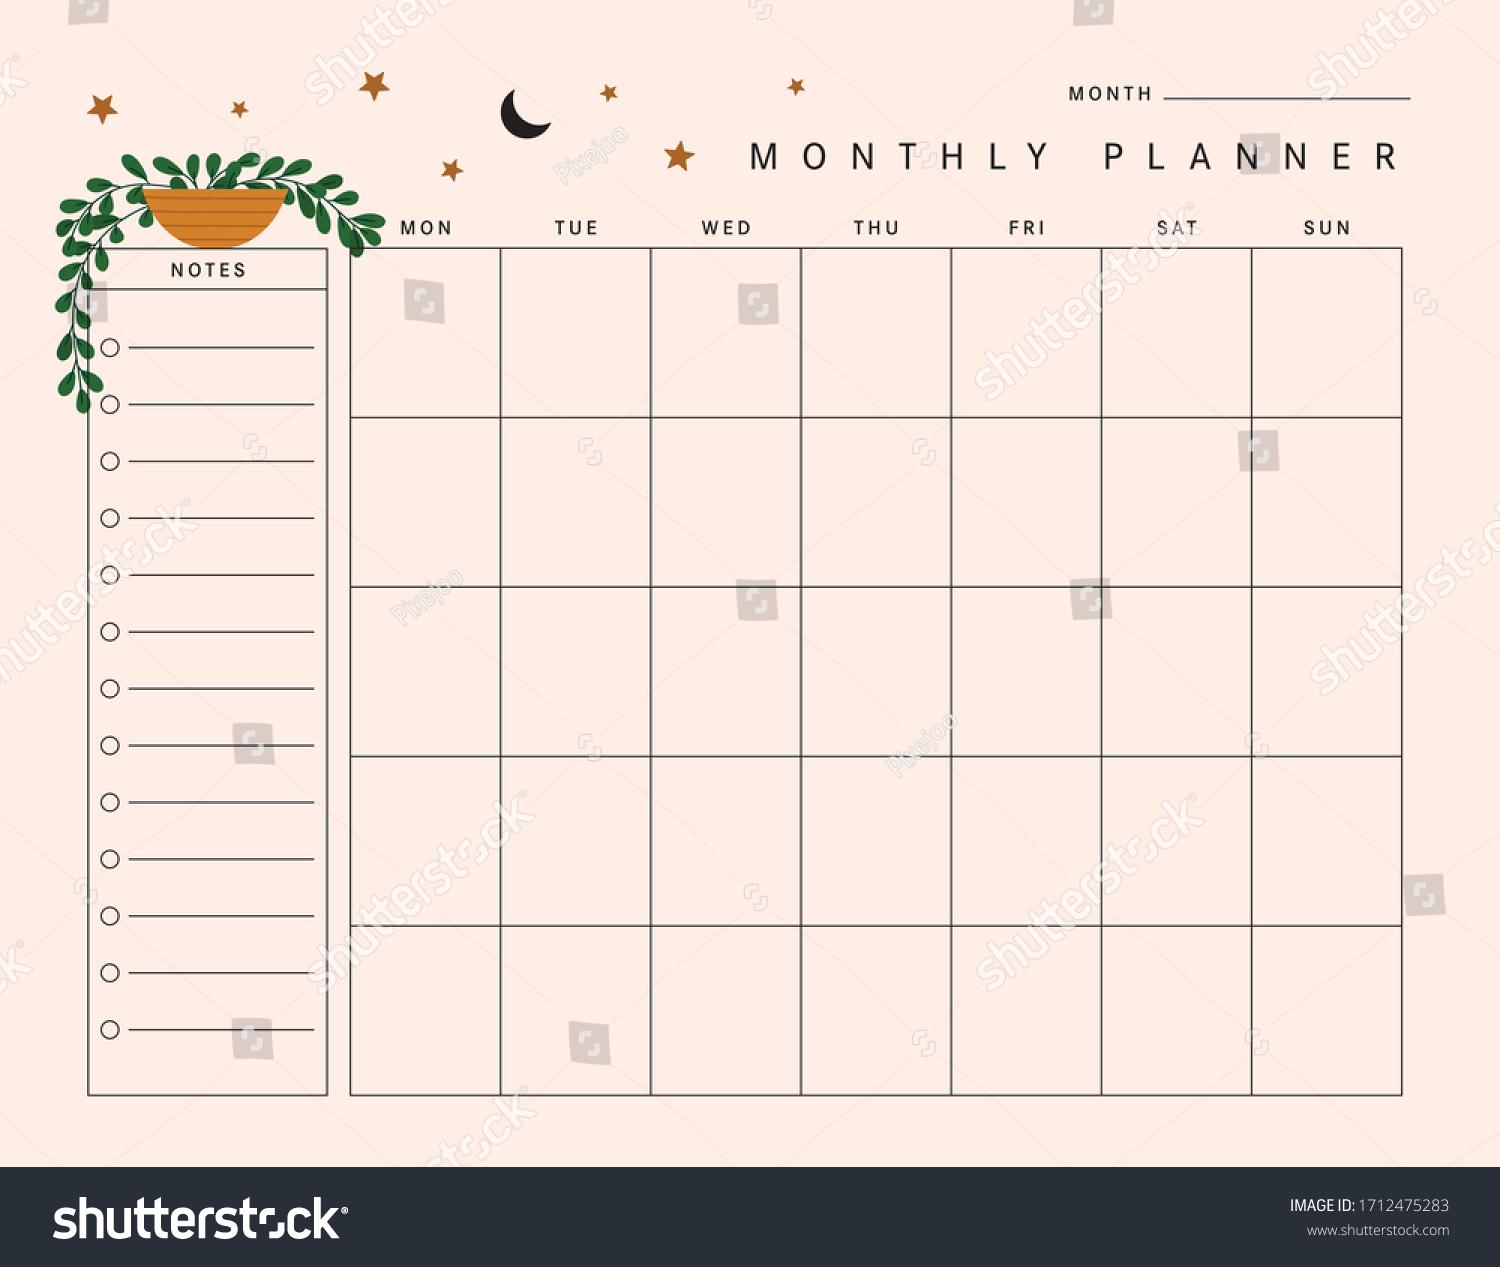 Plant Monthly Planner Template Vector Plants Stock Vector (Royalty Free